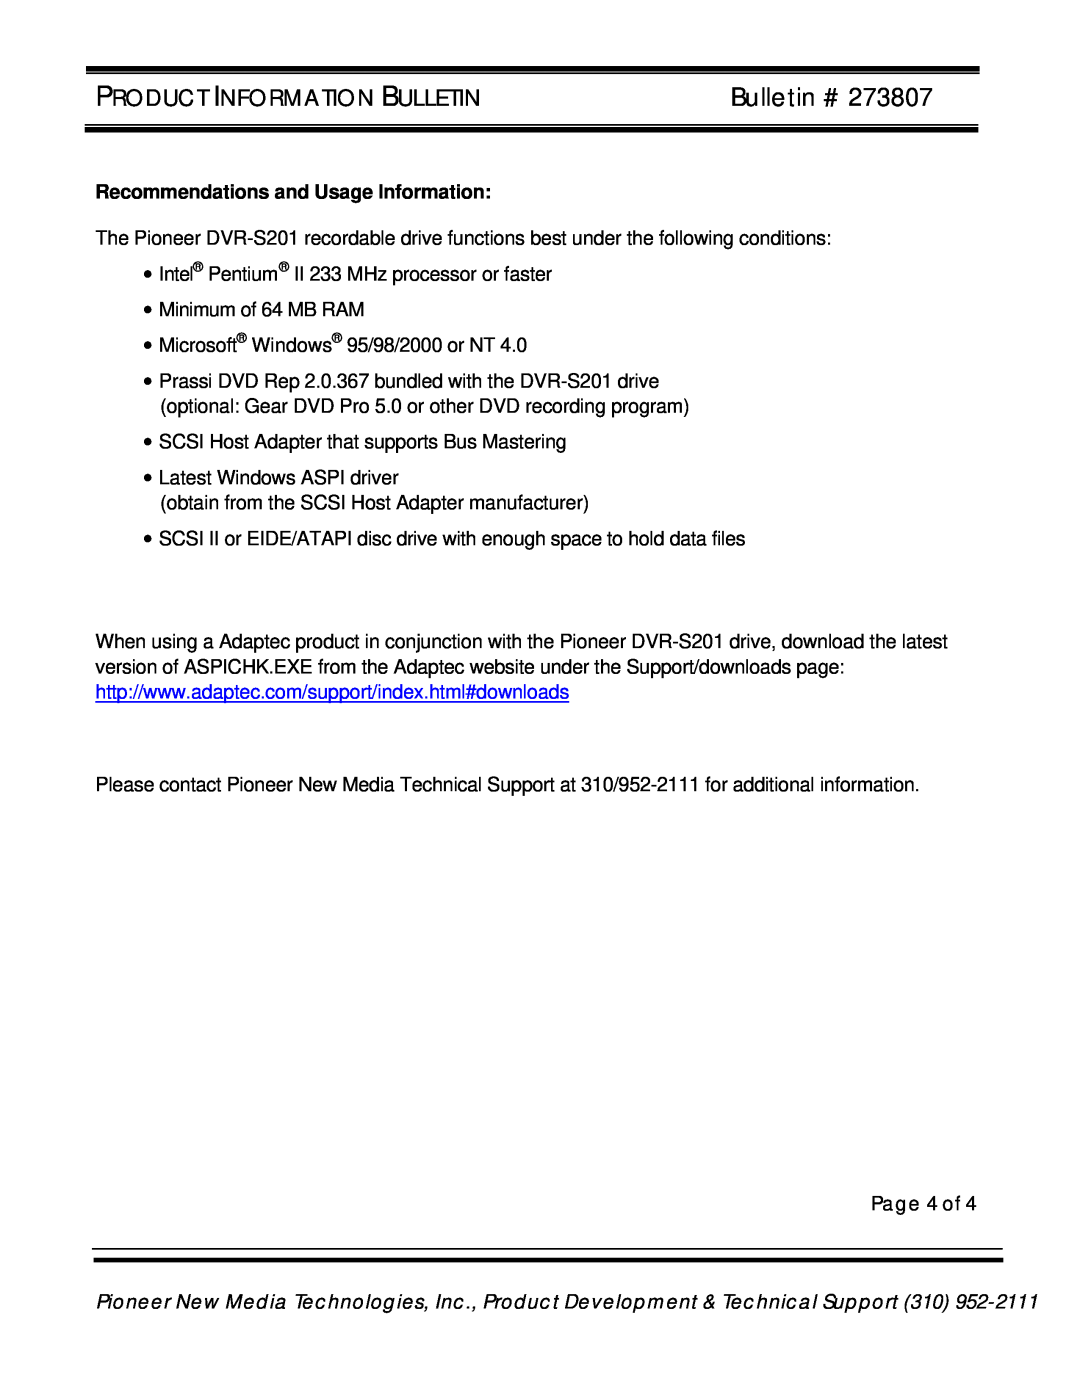 Pioneer DVR-S201 manual Recommendations and Usage Information, Page 4 of, Bulletin #, Product Information Bulletin 